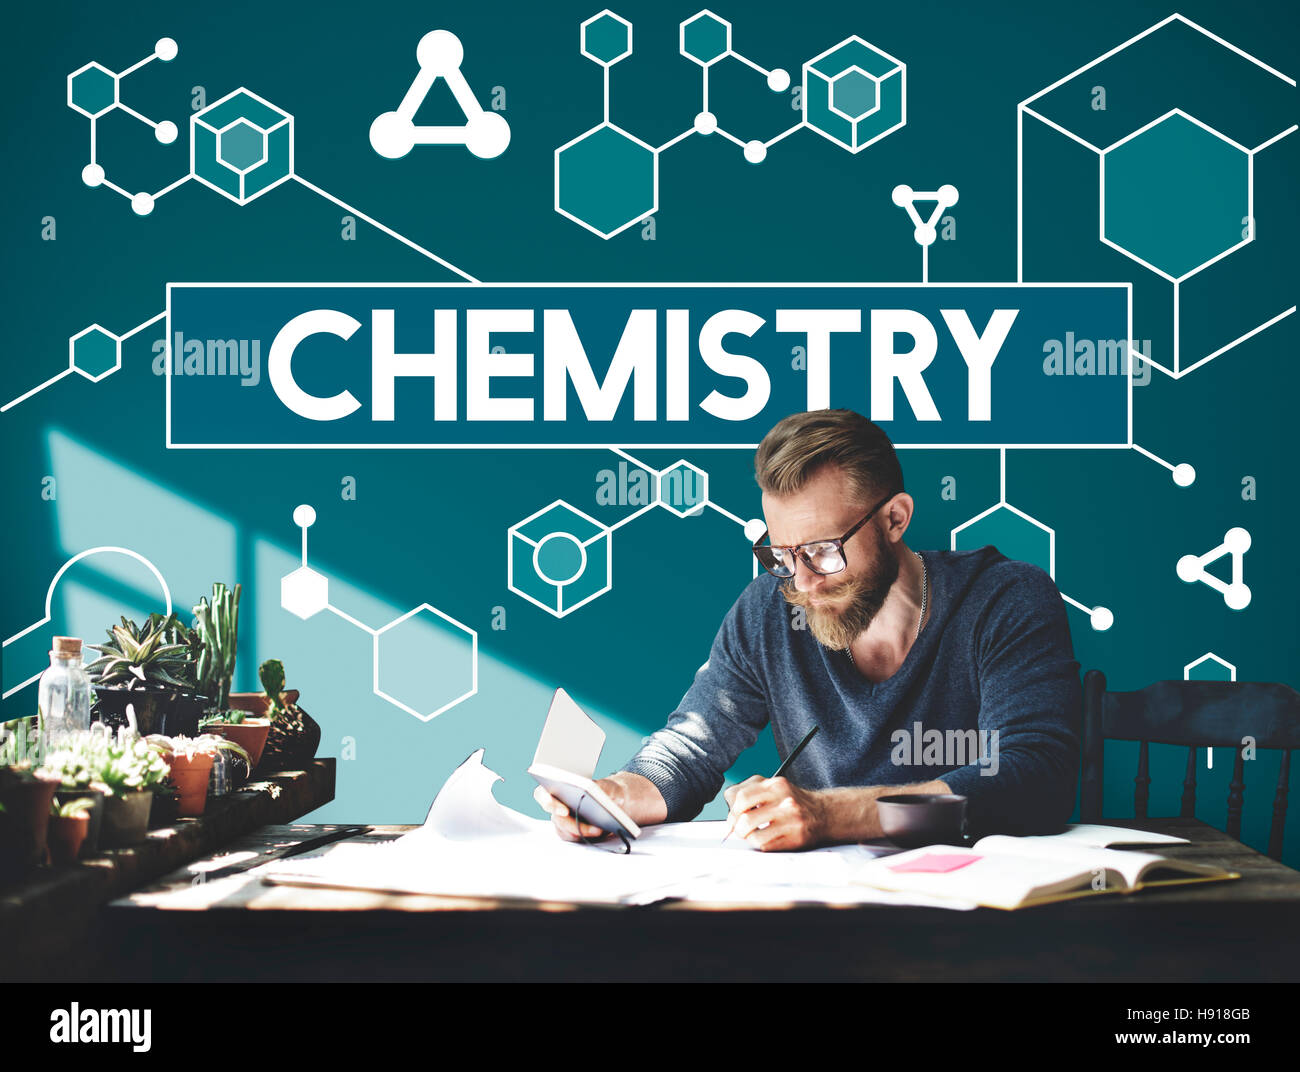 Chemistry Science Research Subject Education Concept Stock Photo